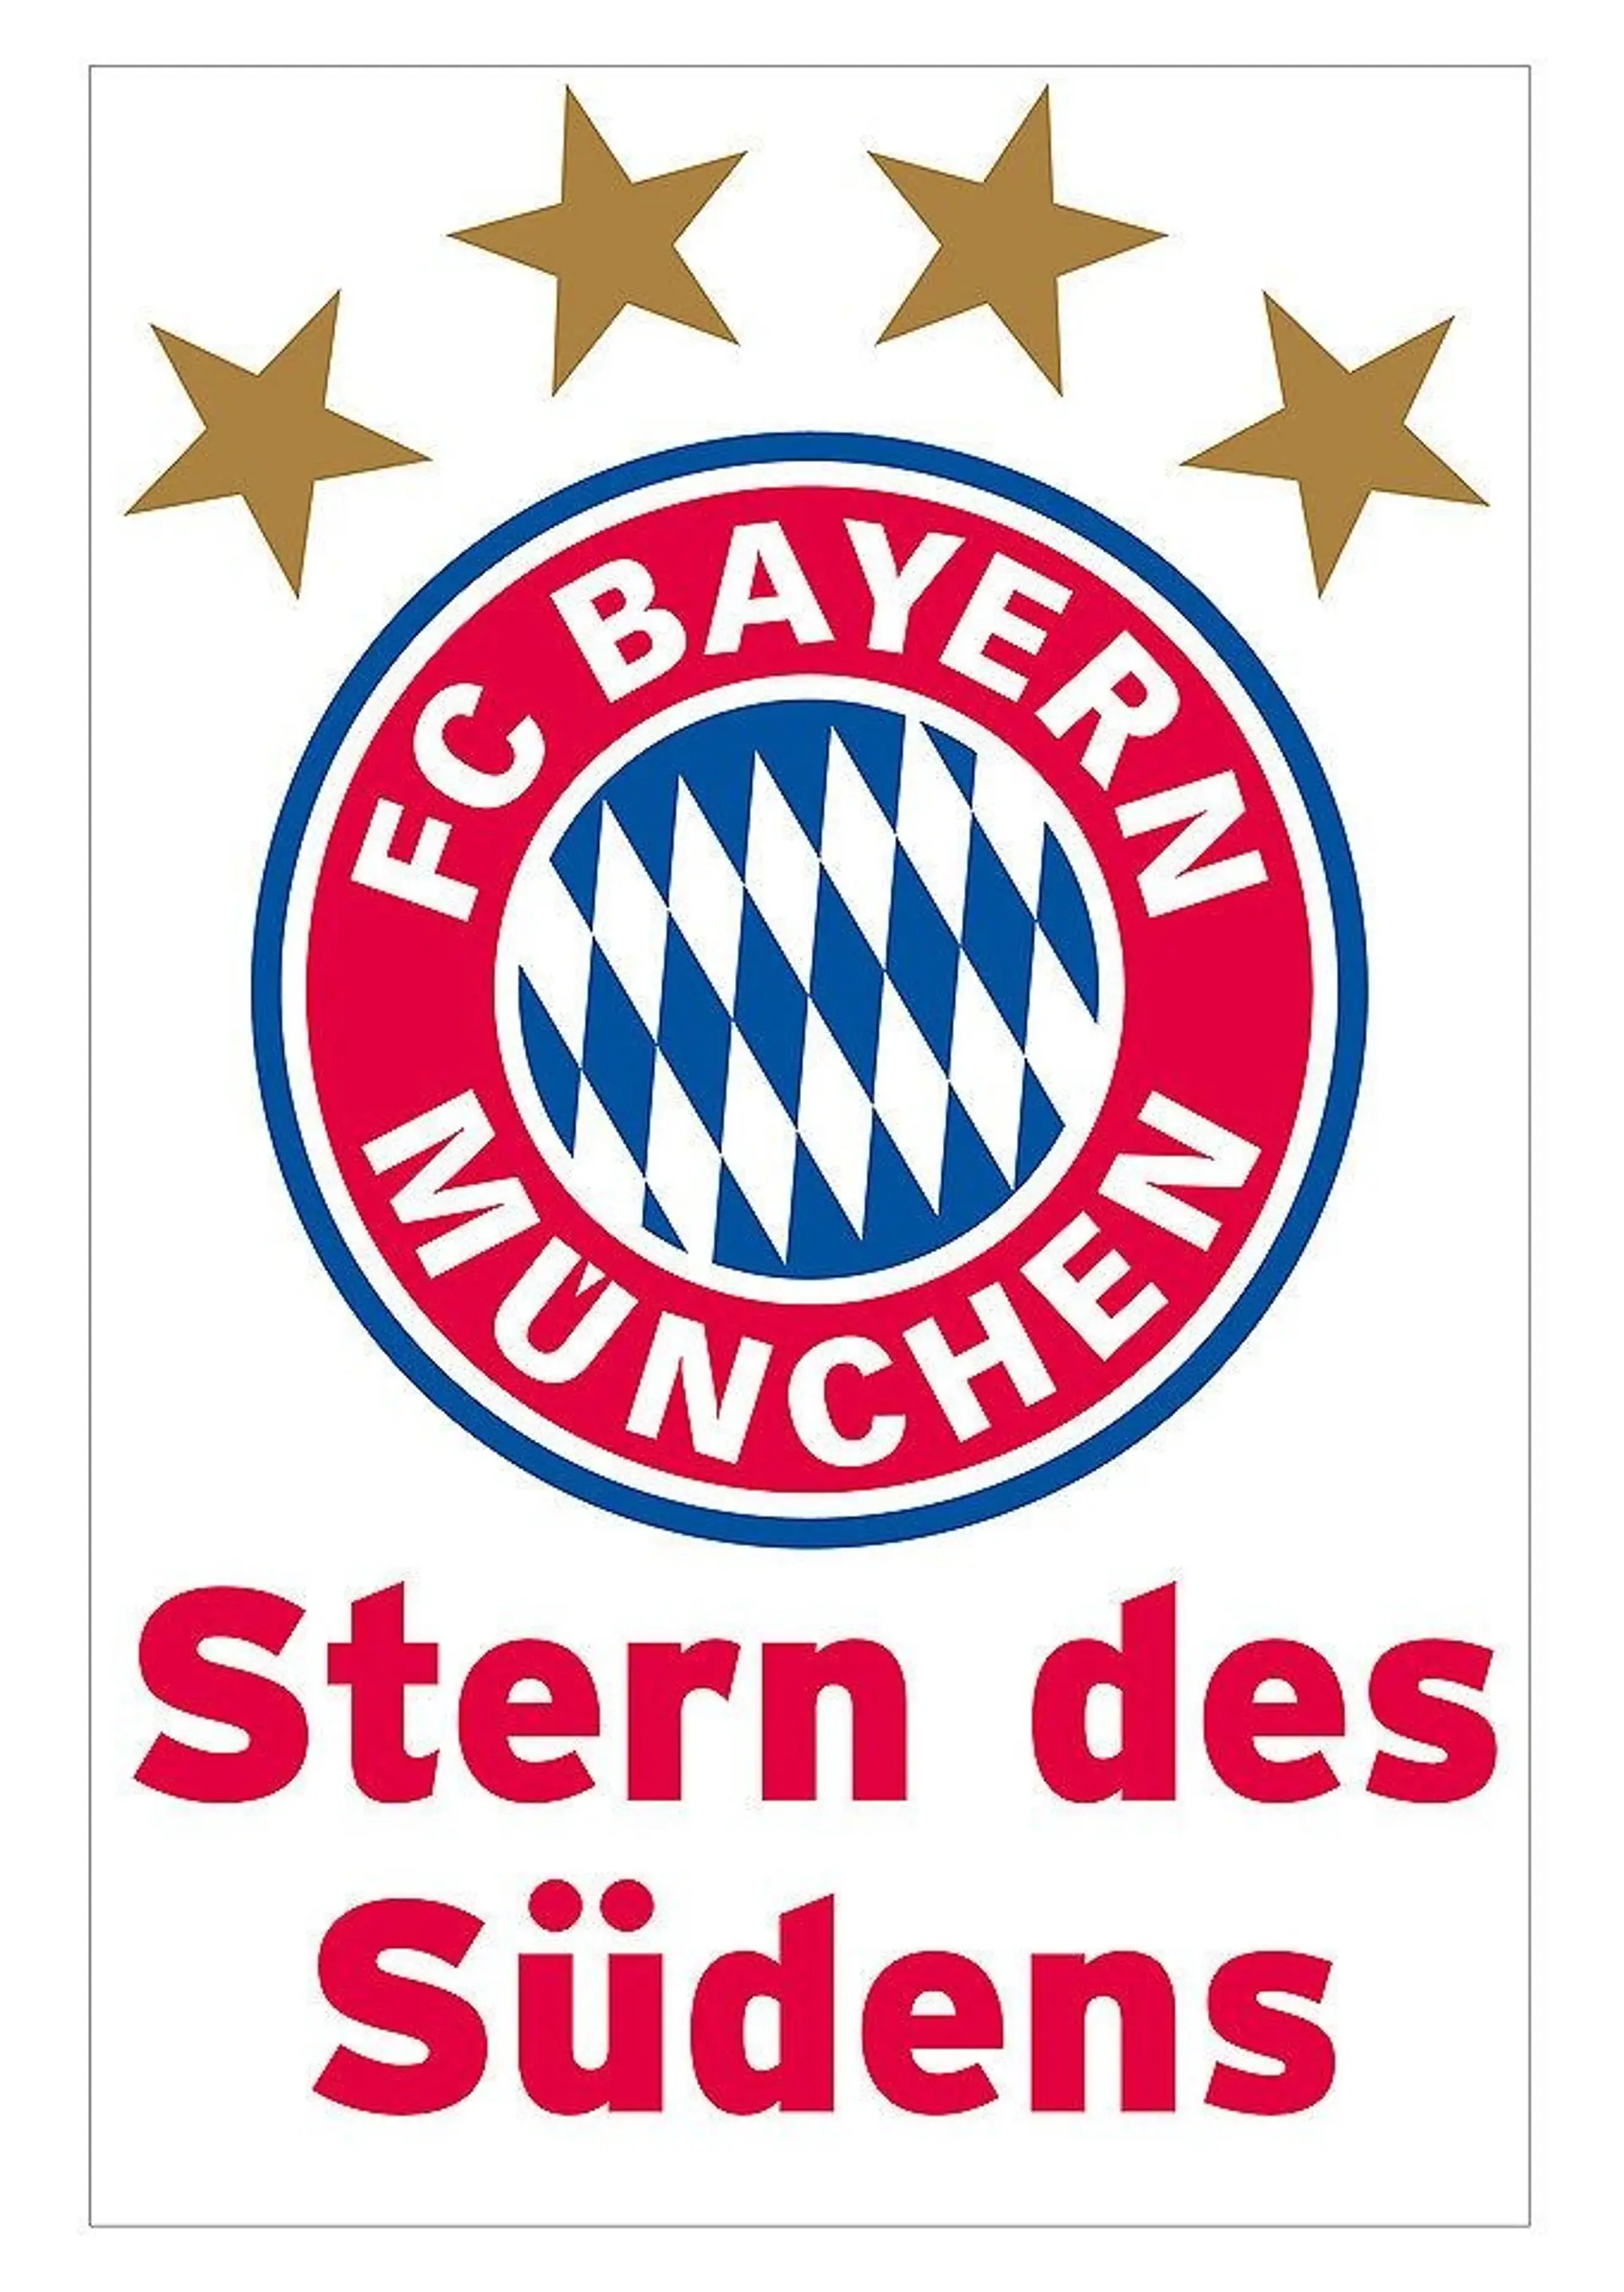 FC bayern for ever